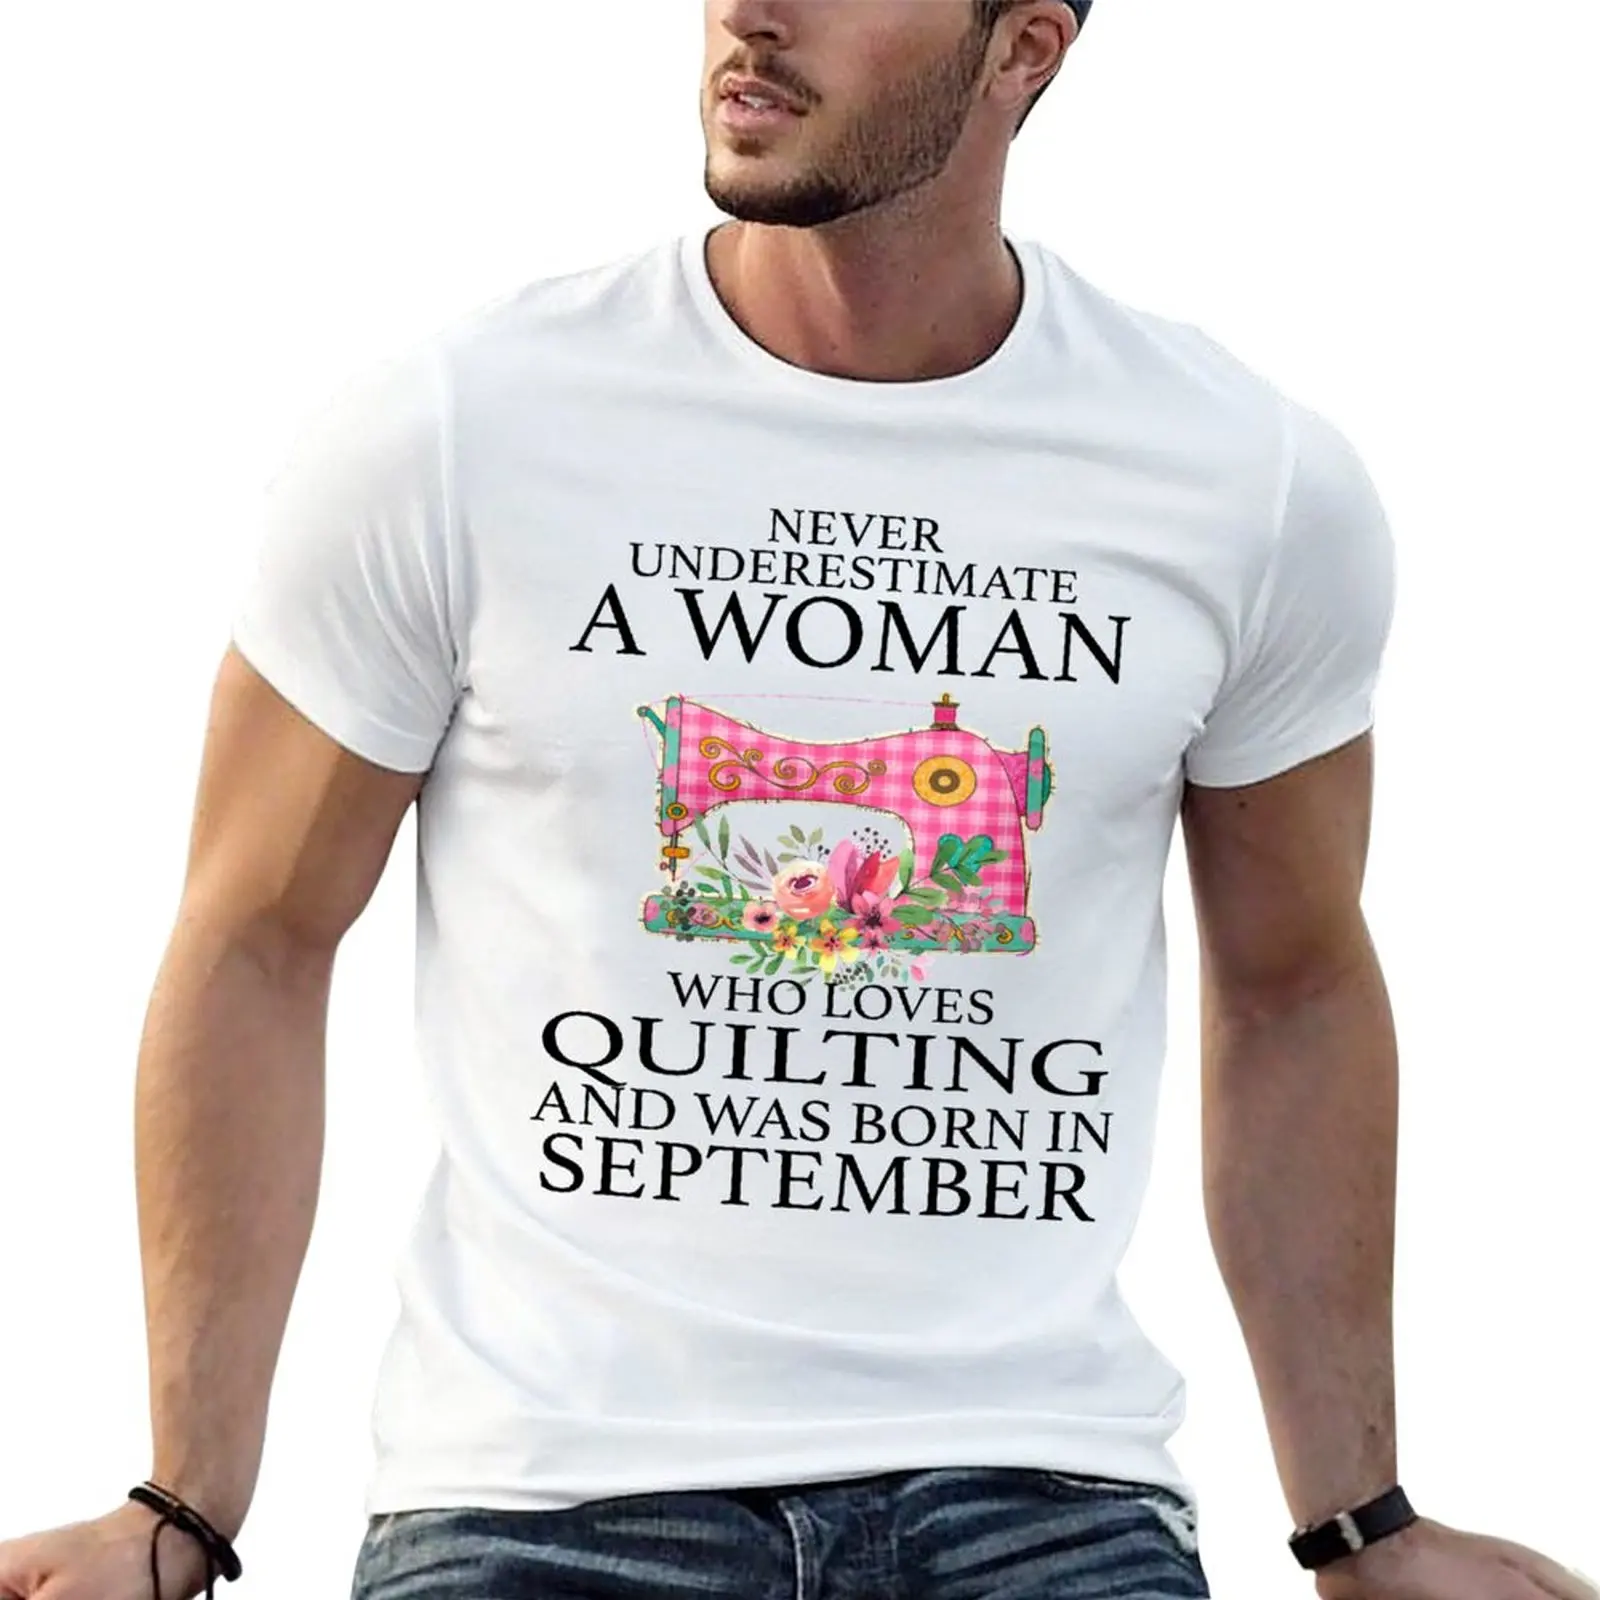 

Never Underestimate a Woman who Loves Quilting and was born in September T-Shirt Short t-shirt black t shirts for men